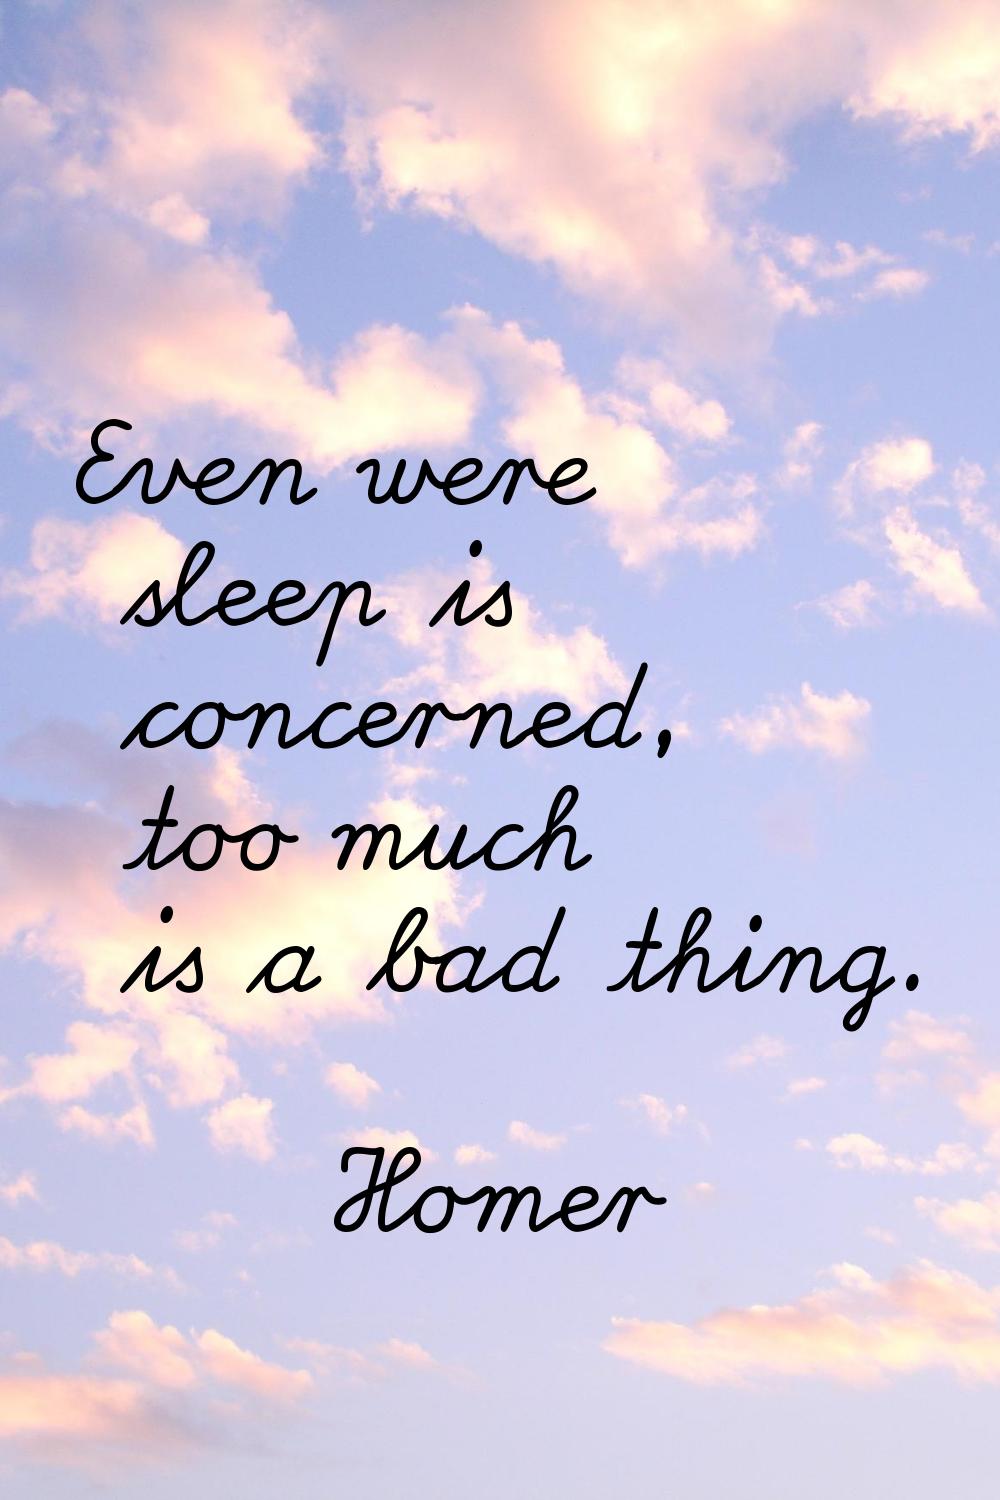 Even were sleep is concerned, too much is a bad thing.